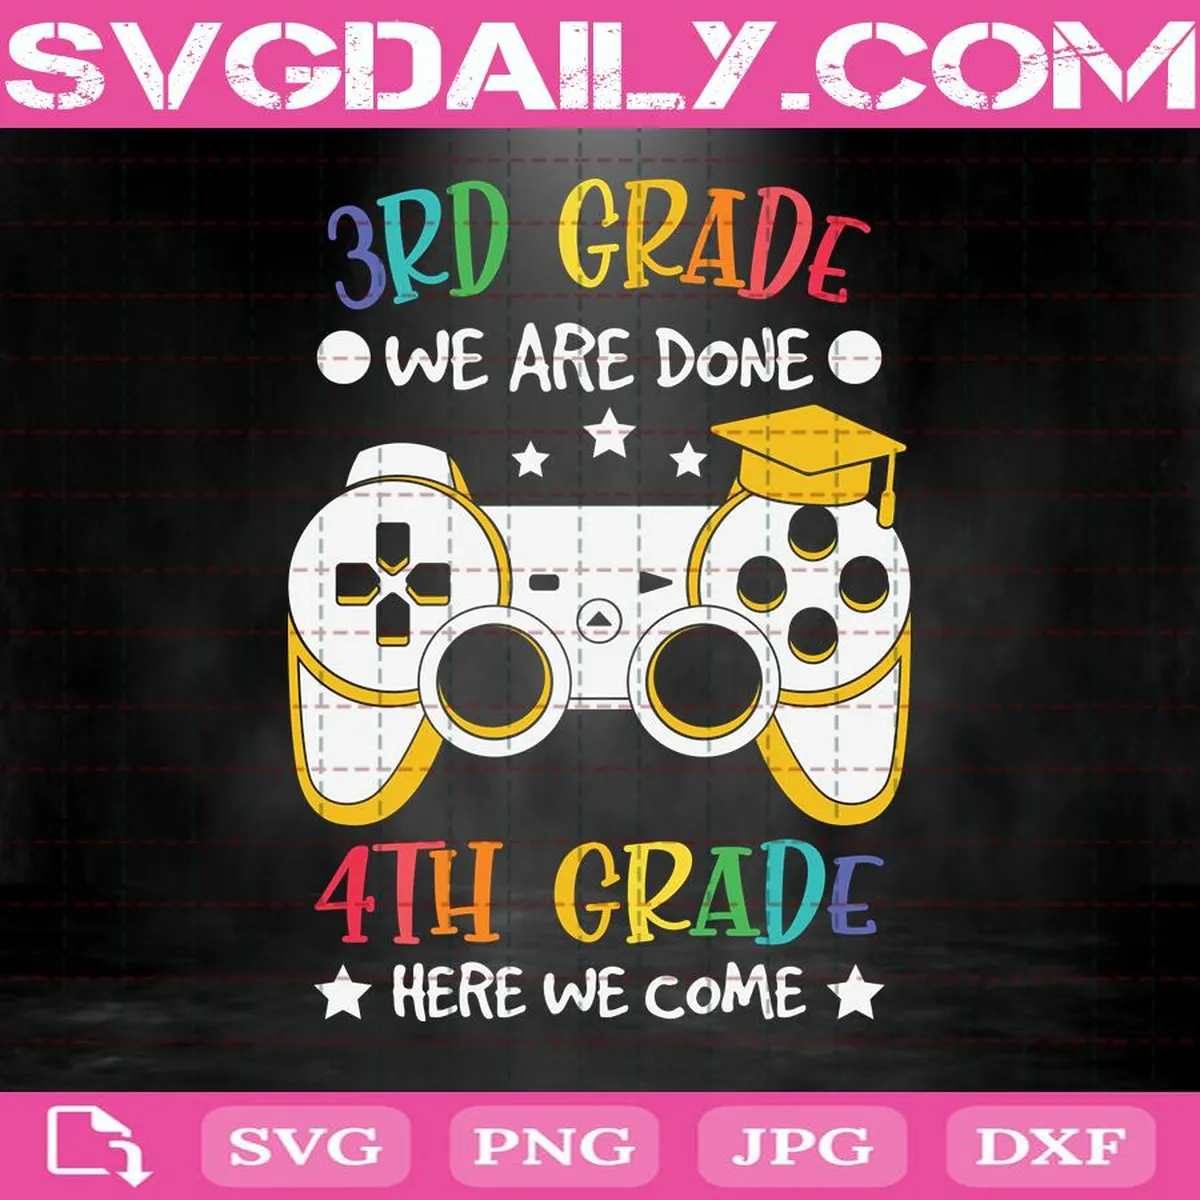 3rd Grade We Are Done Svg, 4th Grade Here We Come Svg, Trending Svg, Video Game Graduation Svg, Back To School Svg